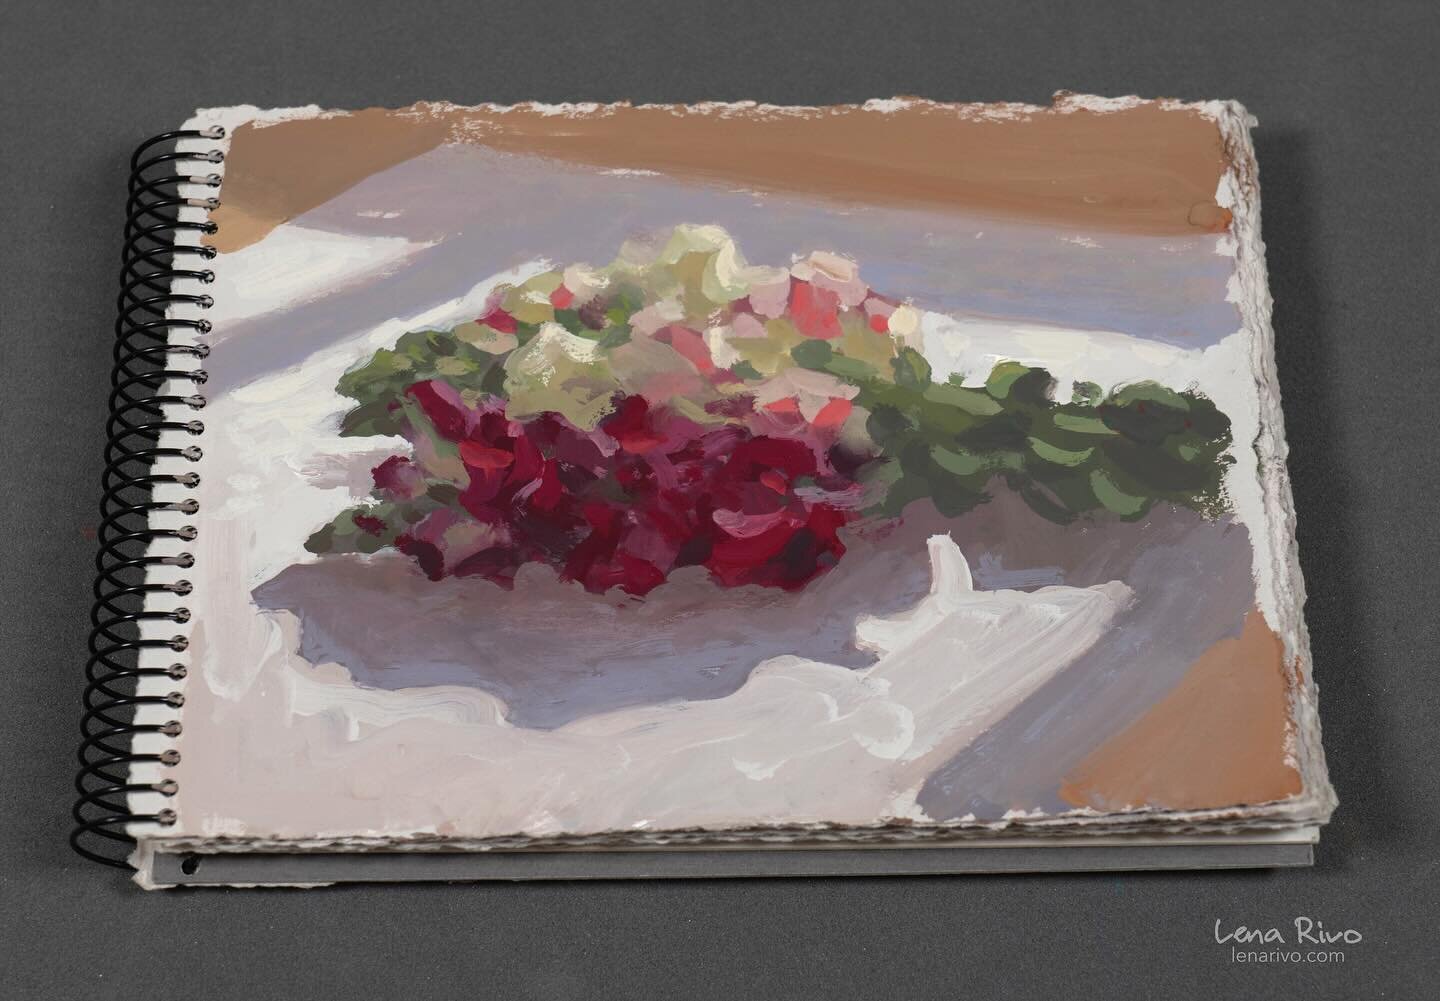 Another bunch of snapdragons in sunlight (painted from life in my studio). Gouache on paper. 5x7 in.
***
I make these sketchbooks myself. I have described the process in my Painting Process article no.10 in the blog on my website. You can find the li